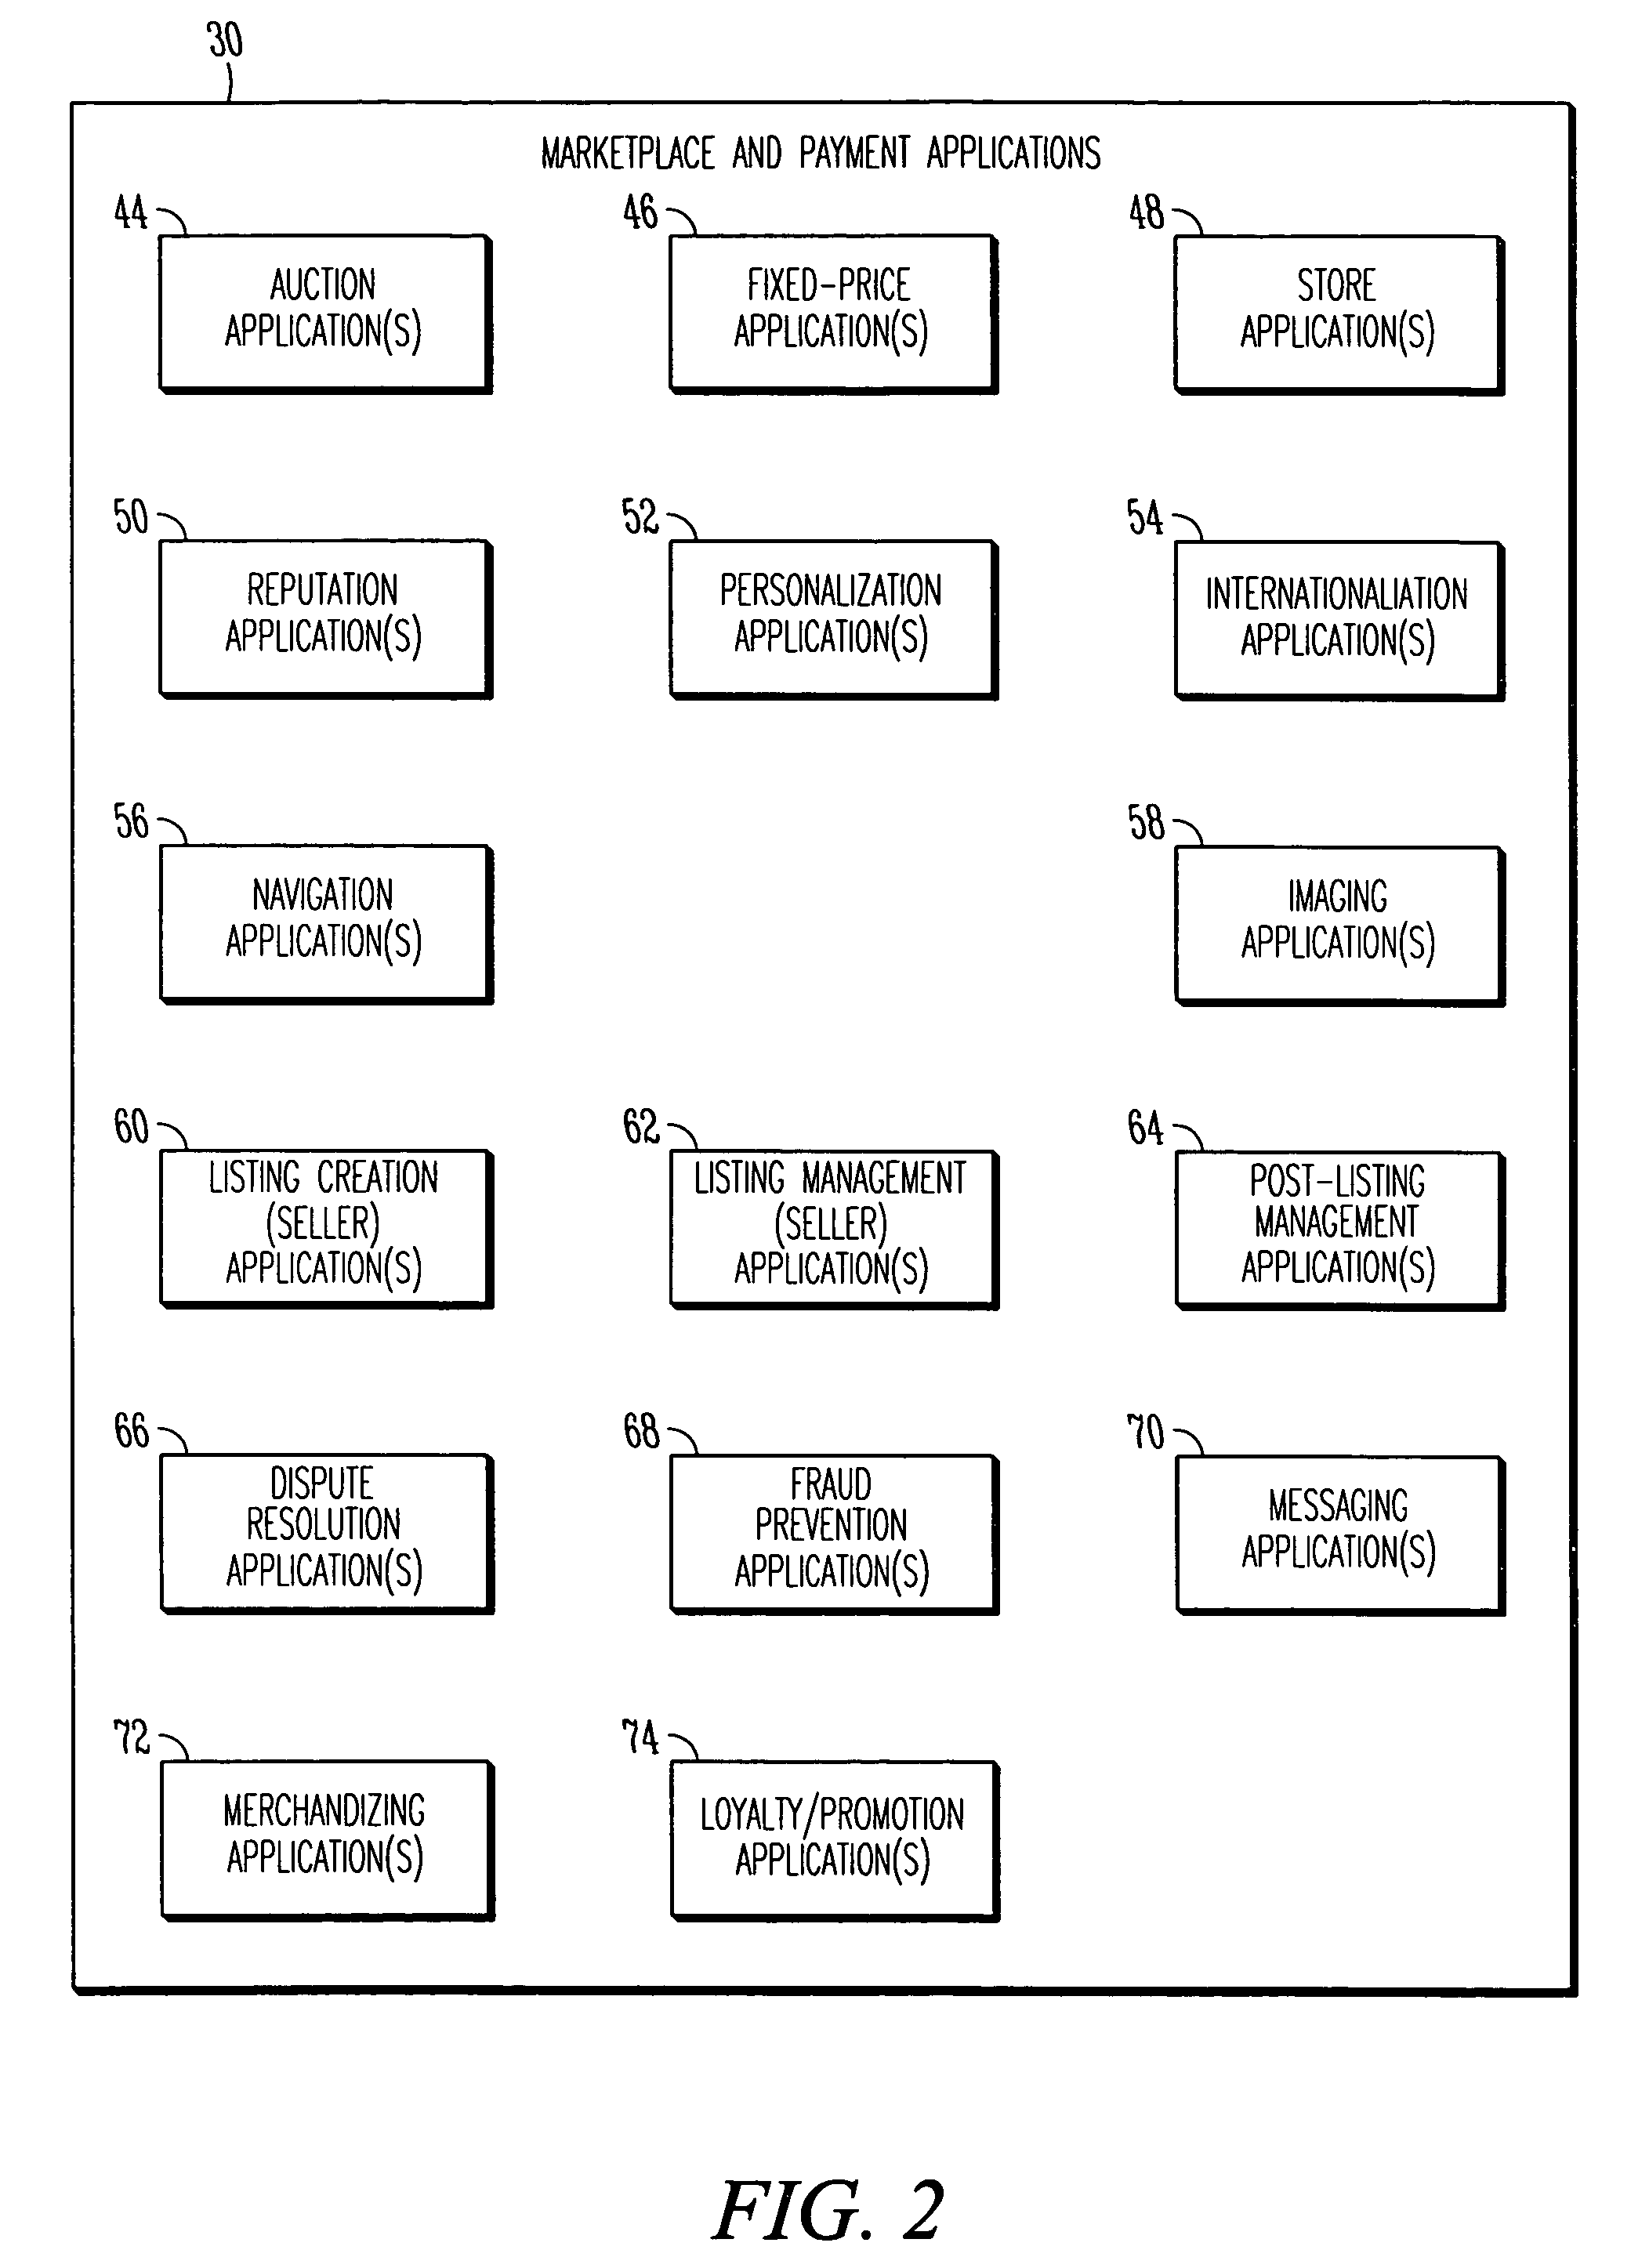 Method and system to design a dispute resolution process